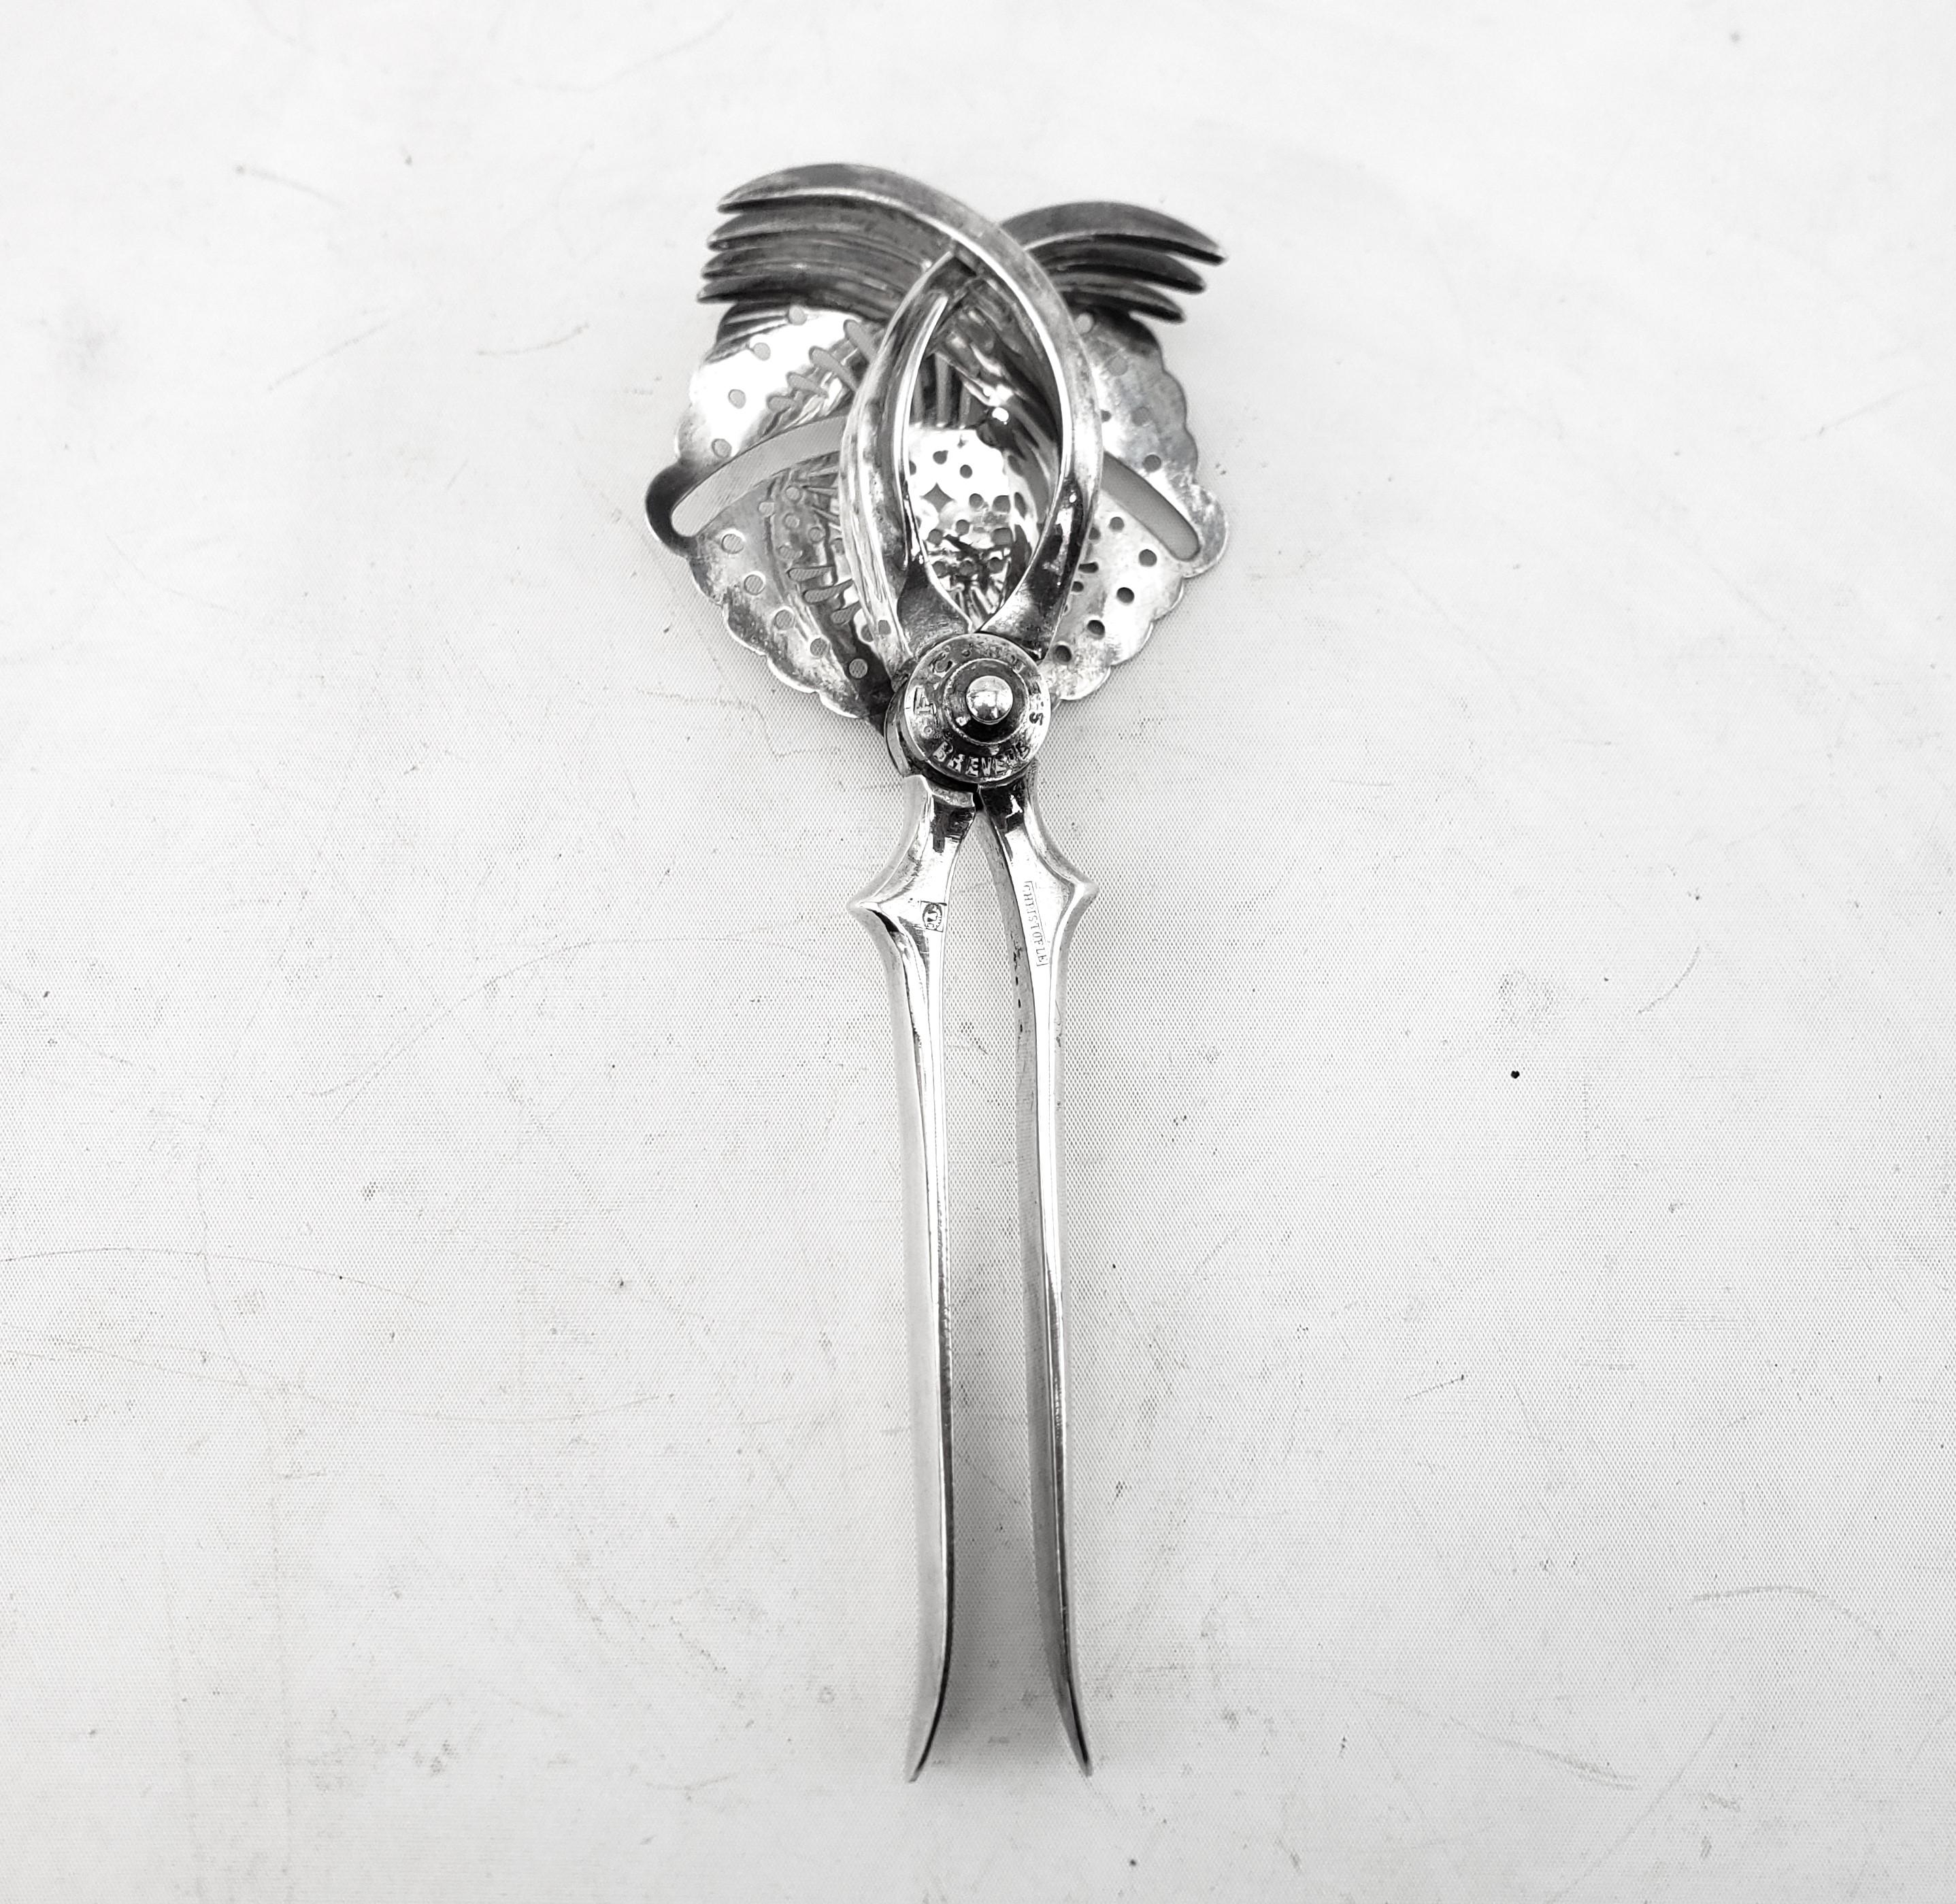 This antique citrus press or juicer was made by the renowned Christofle Silver Company of France and dates to approximately 1920 and done in an Edwardian style. This well made and heavy press is composed of silver plate and works with a scissor